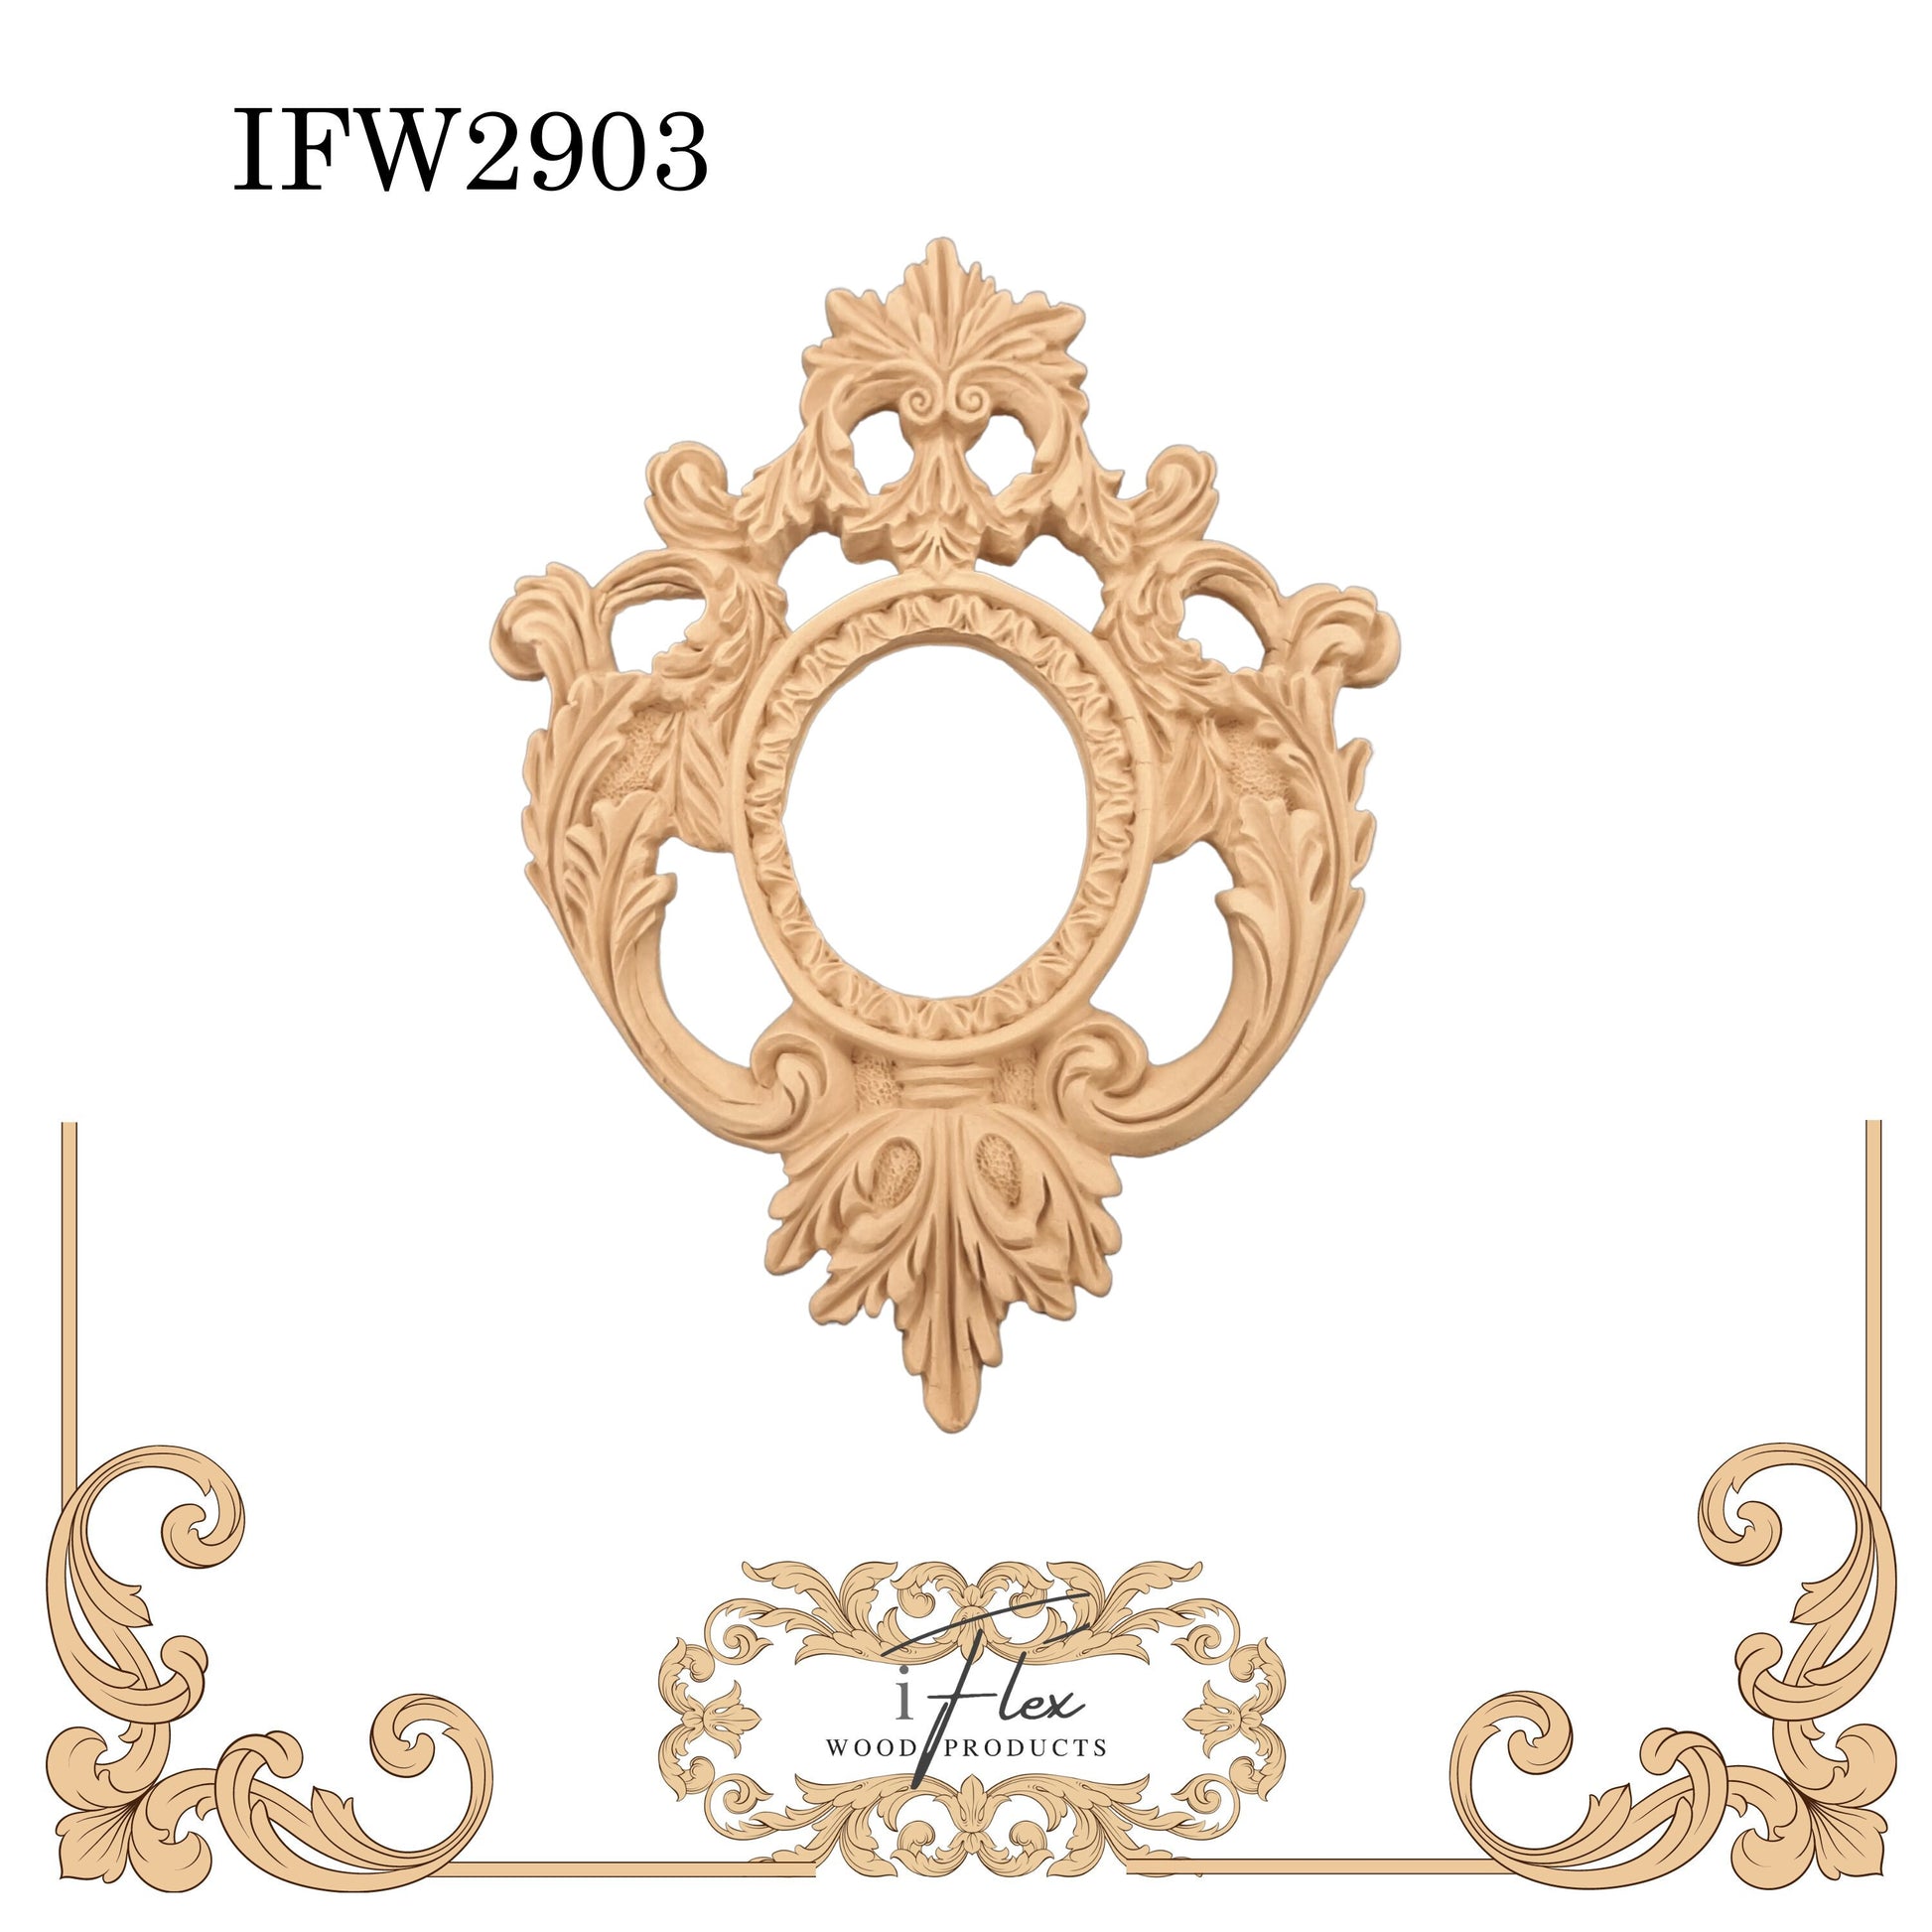 IFW 2903 iFlex Wood Products, bendable mouldings, flexible, wooden appliques, centerpiece